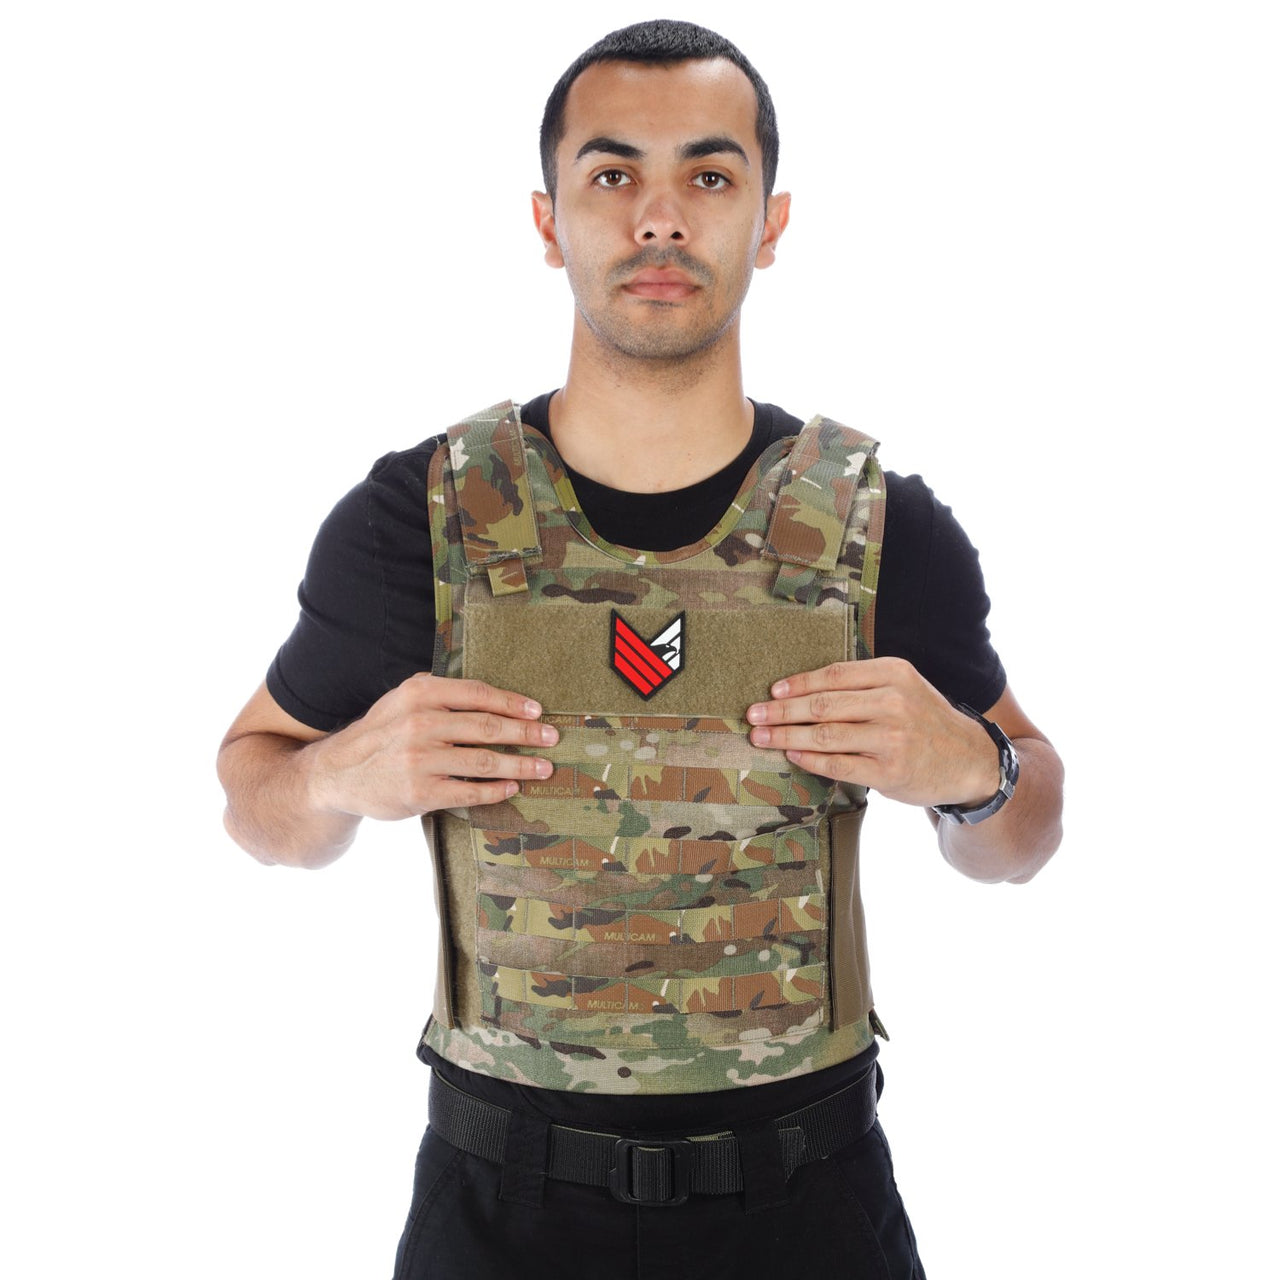 A man holding a Body Armor Direct All Star Tactical Enhanced Multi-Threat Vest in front of a white background.